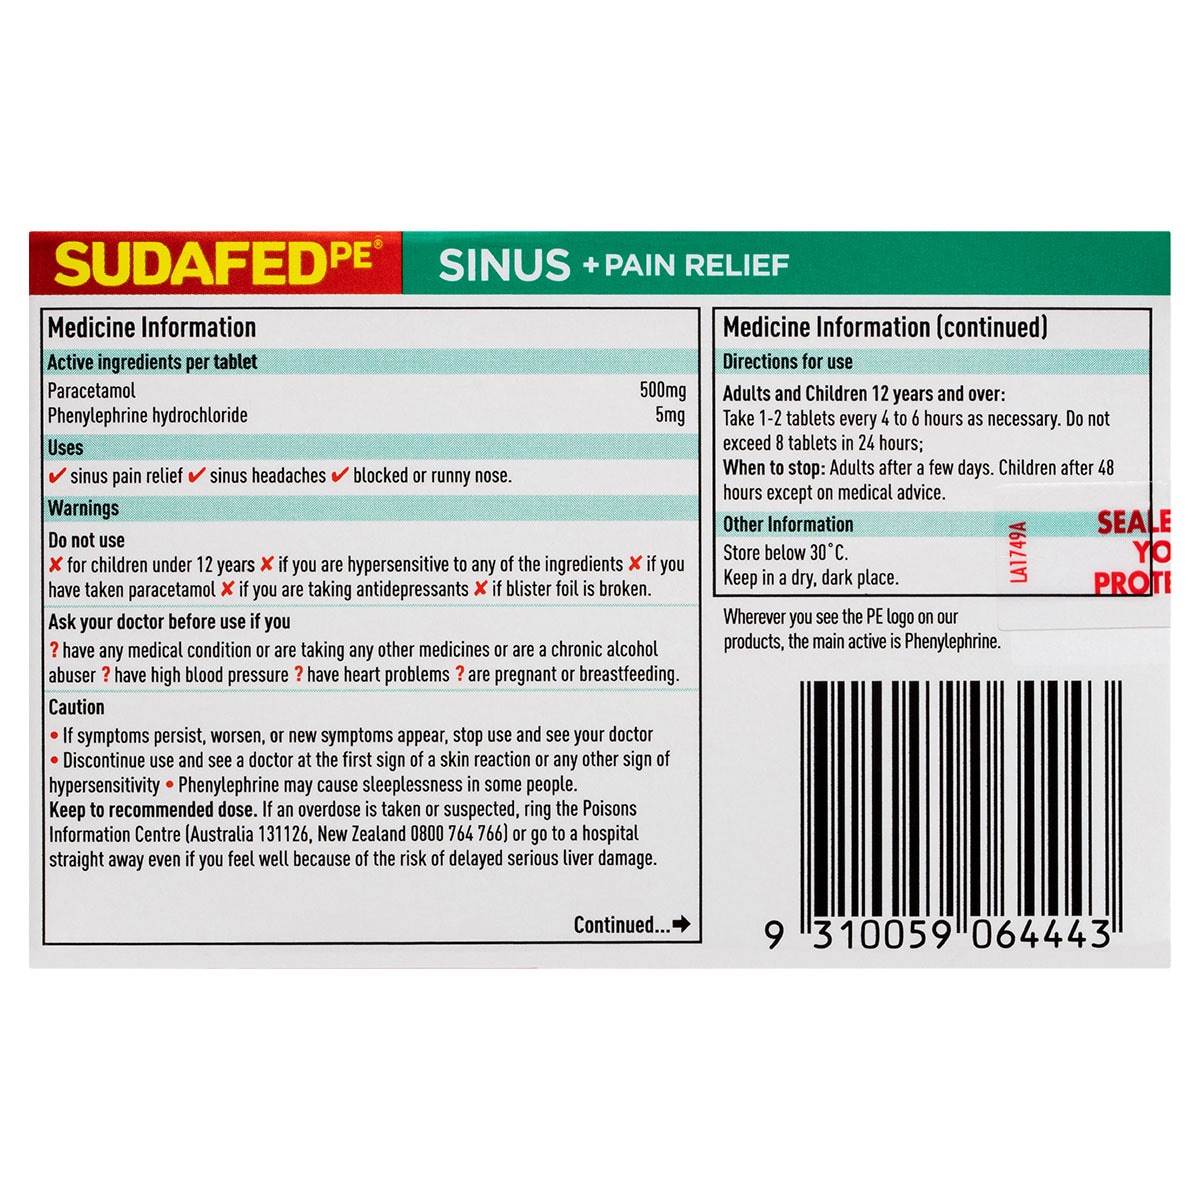 Sudafed PE Sinus + Pain Relief 48 Tablets